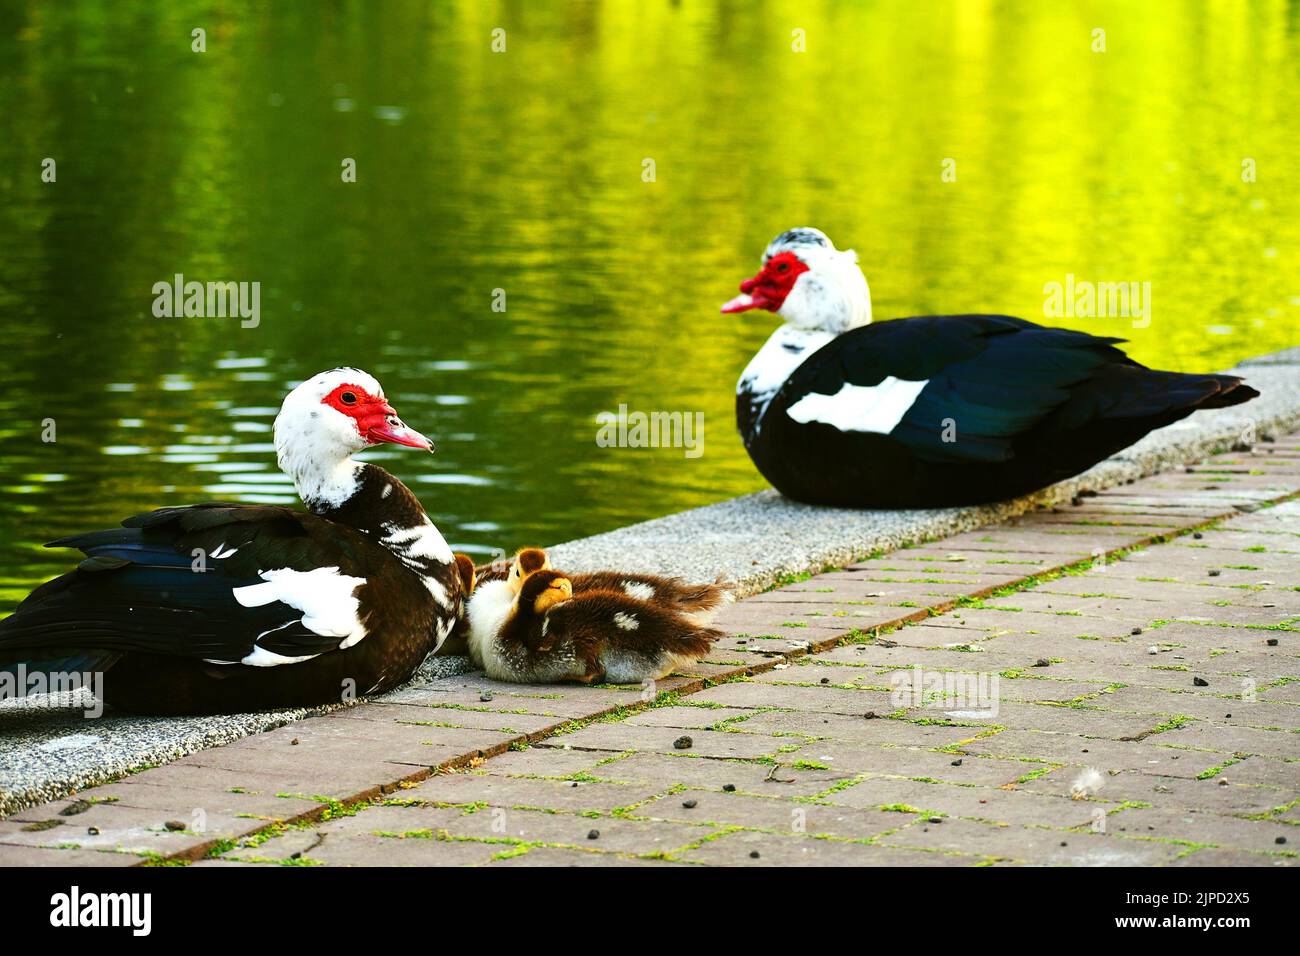 Domestic Muscovy duck family Stock Photo - Alamy